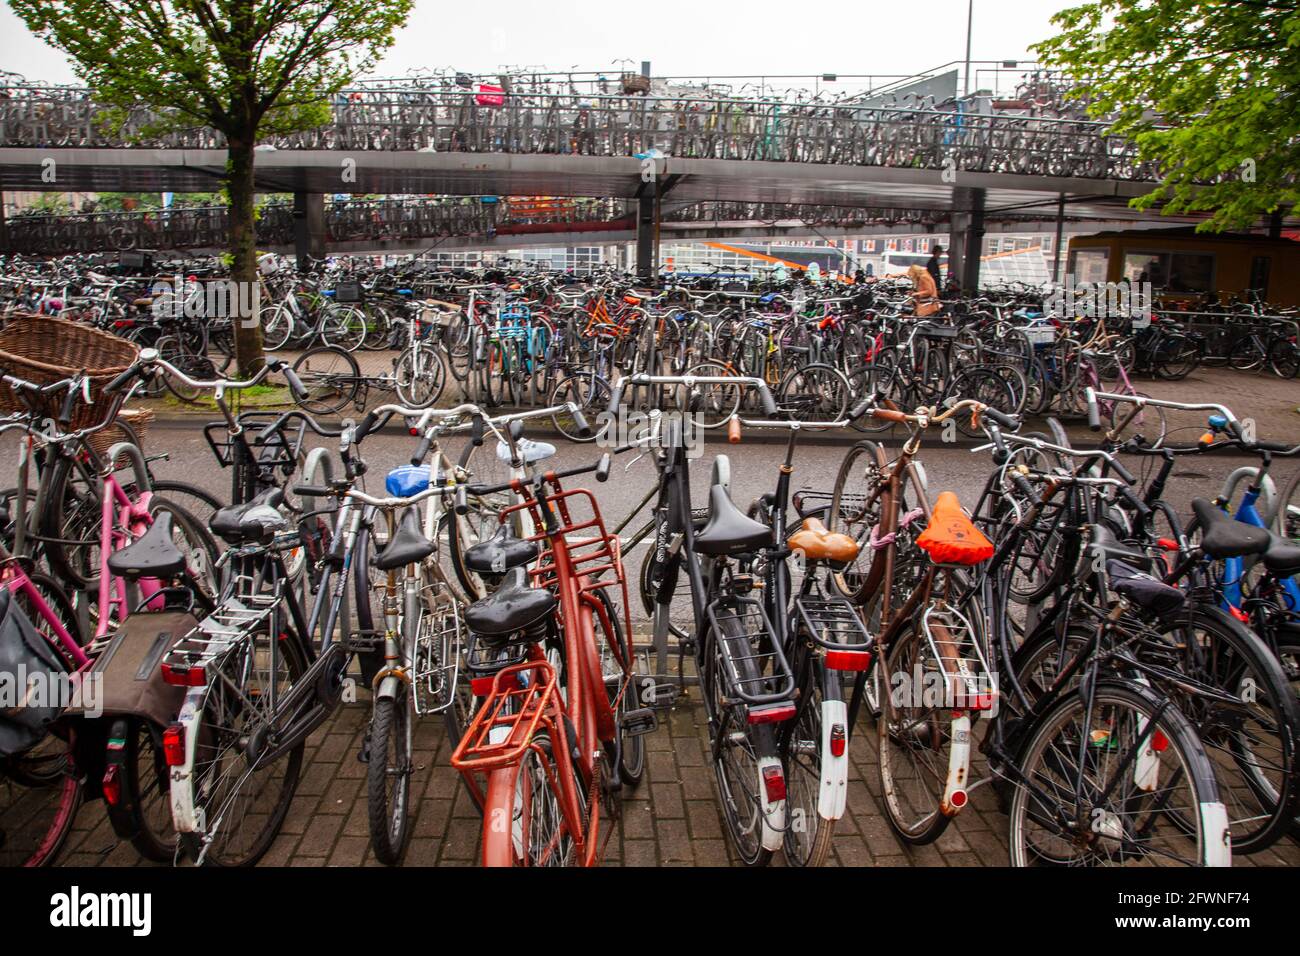 amsterdam commuter train station parking lot showing bicycle healthy lifestyle culture minimising fossil fuel usage Stock Photo